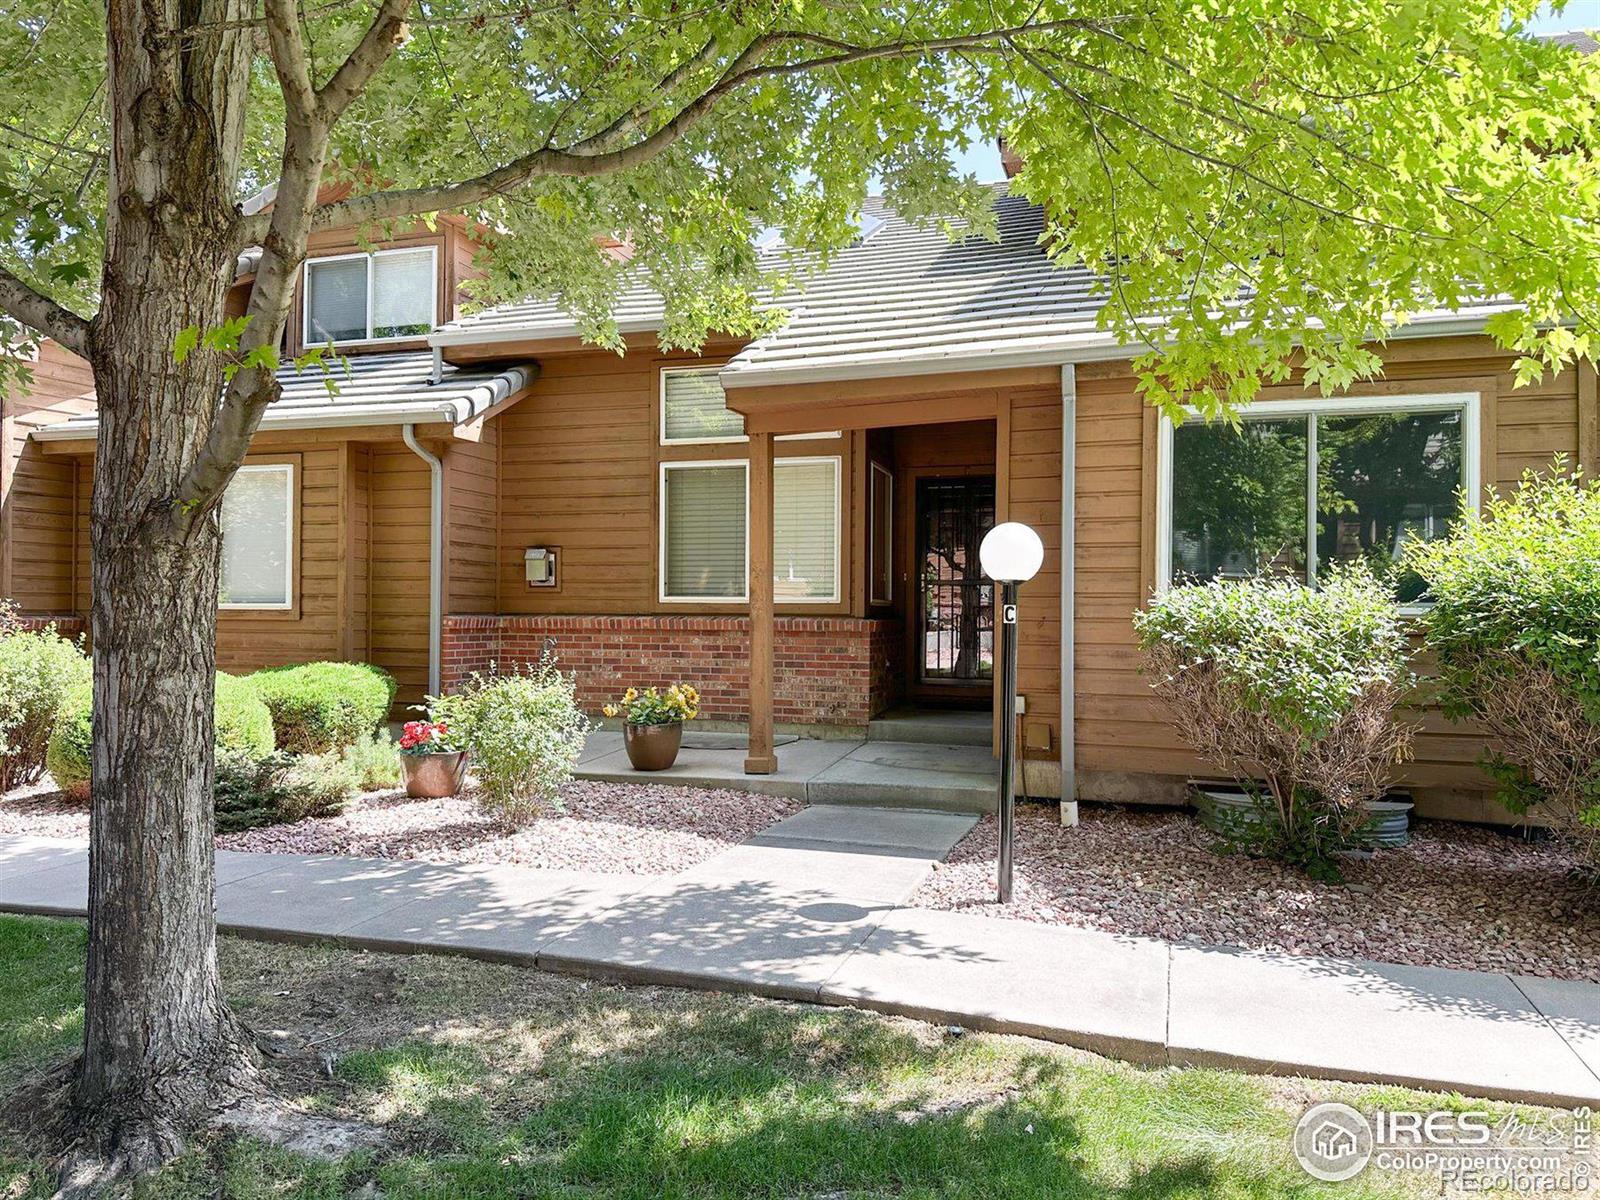 11865 w 66th place, Arvada sold home. Closed on 2023-12-01 for $465,000.